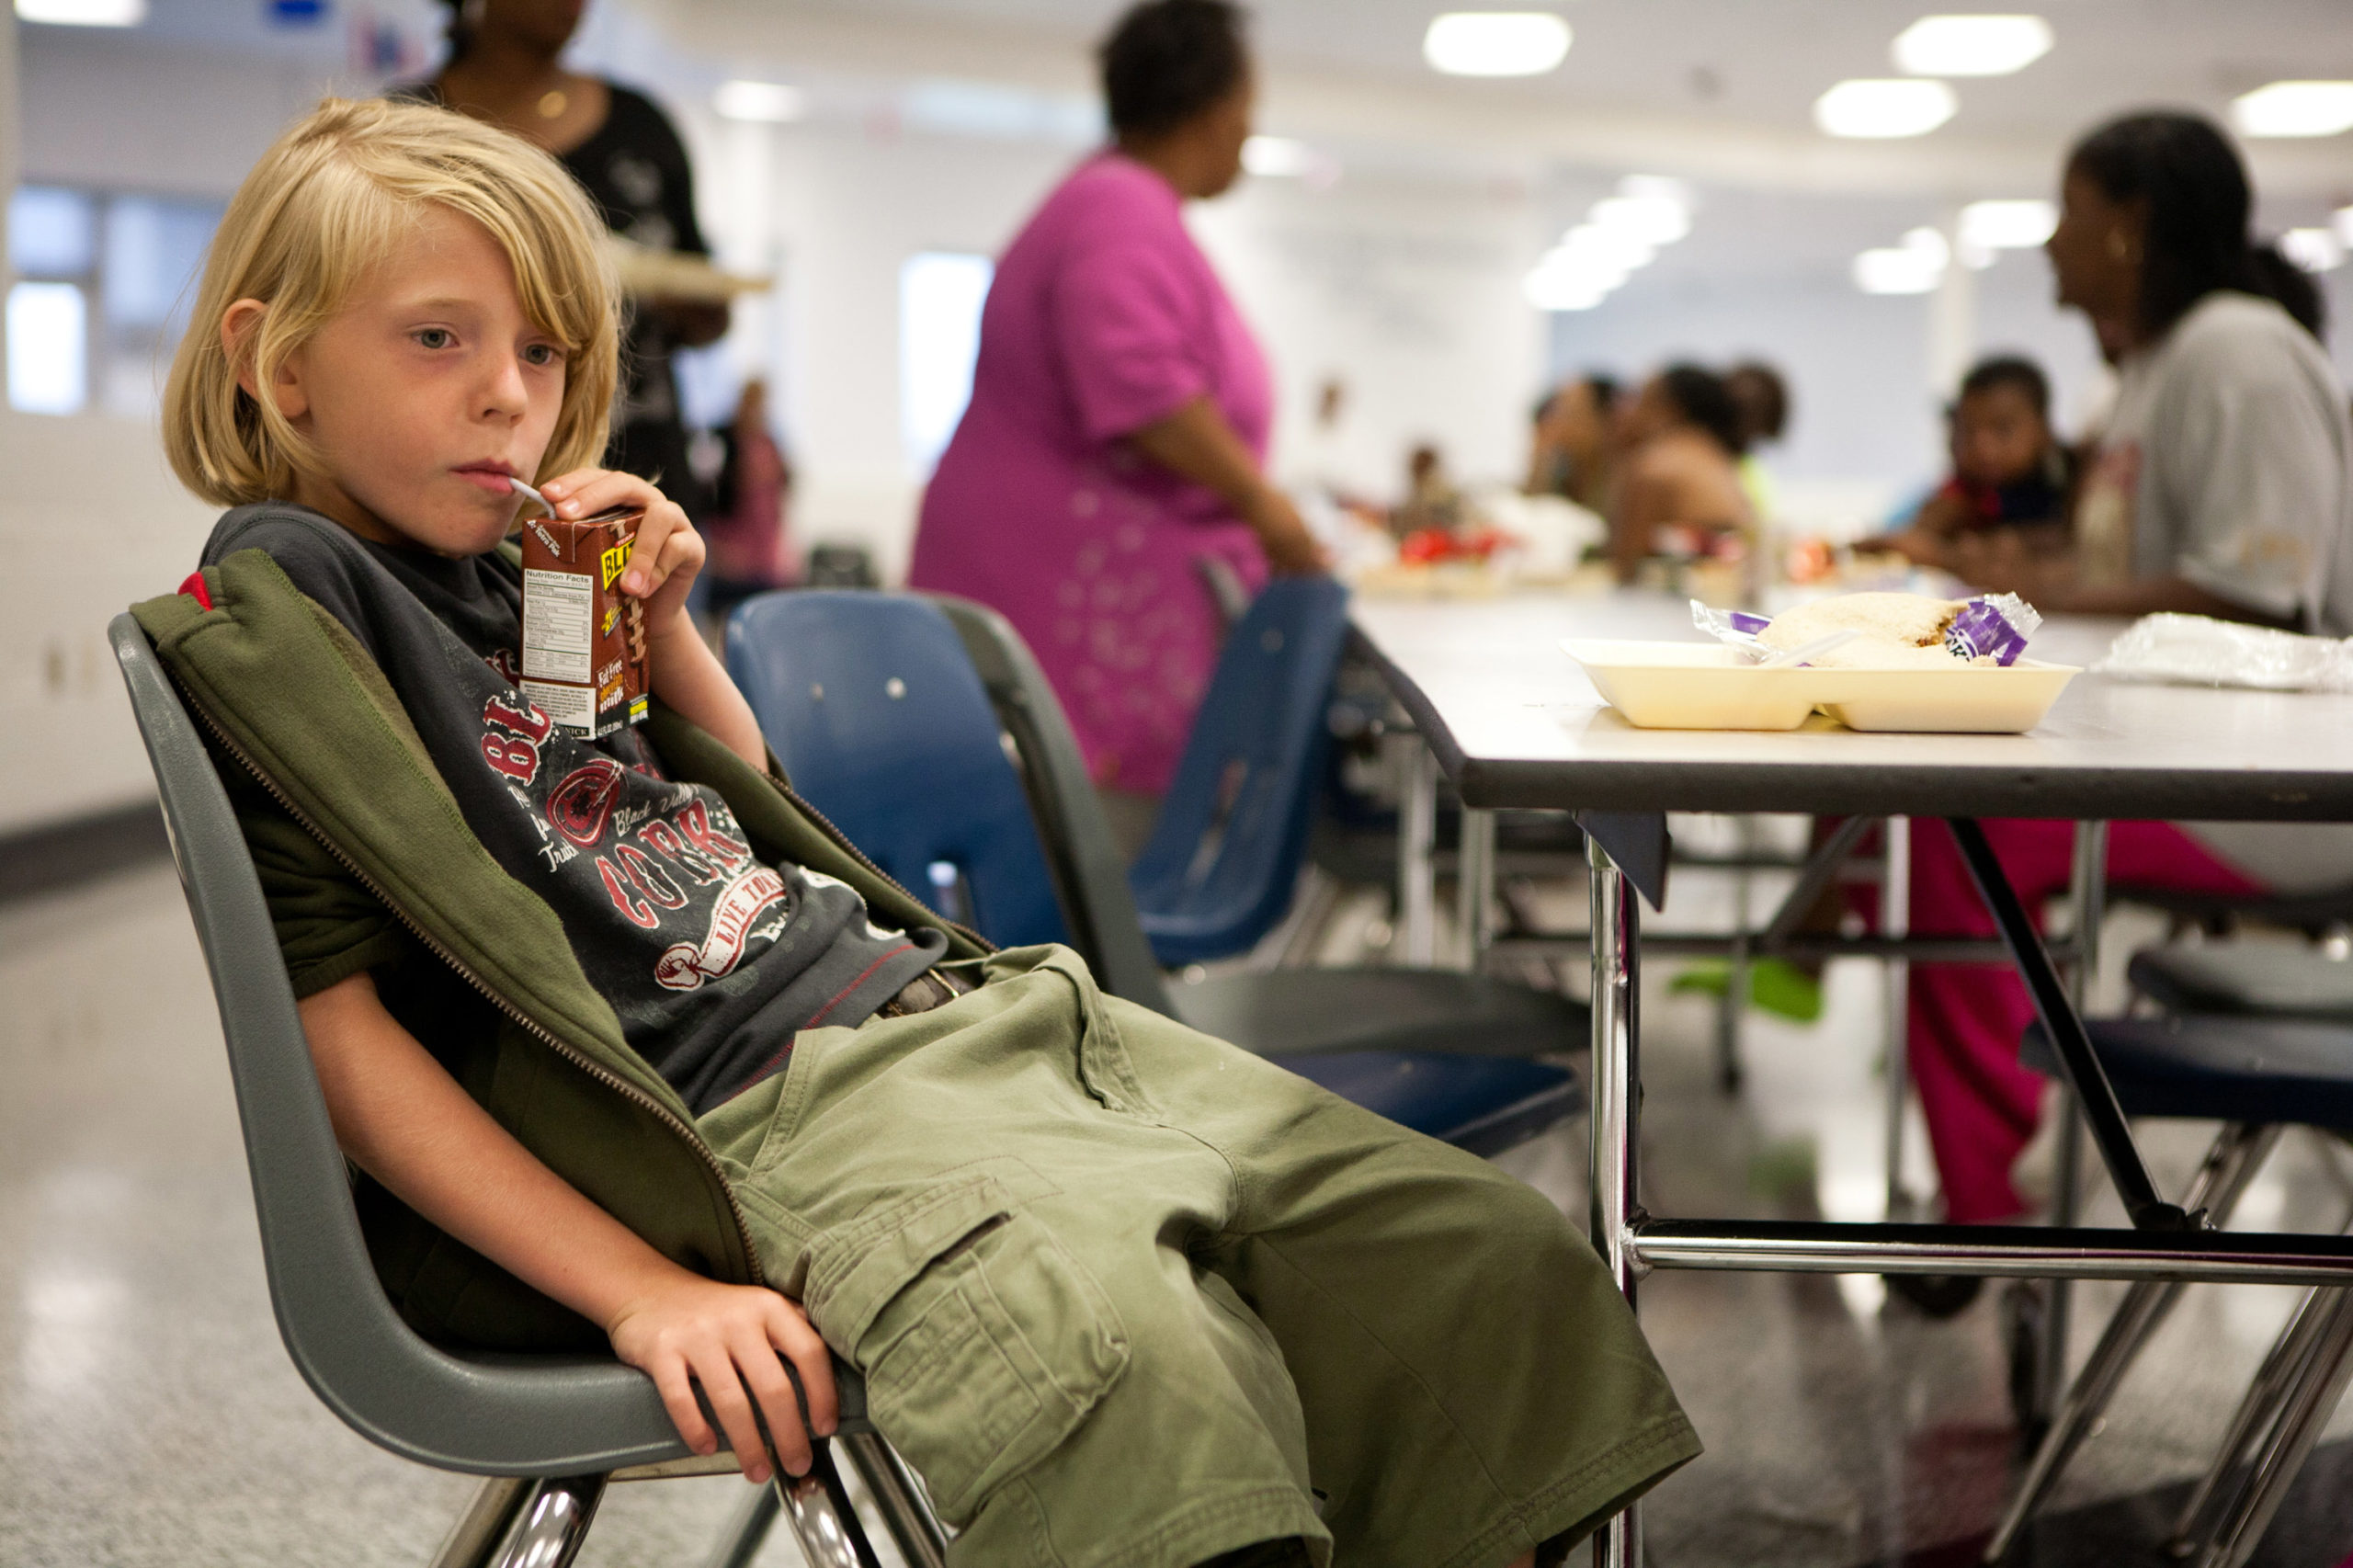 David James, 9, of Virginia Beach, drinks chocolate milk in a shelter for Hurricane Irene at Landstown High School on August 27, 2011 in Virginia Beach, Virginia. The Category 1 storm made landfall in North Carolina early Saturday morning. (Photo by Brendan Hoffman/Getty Images)